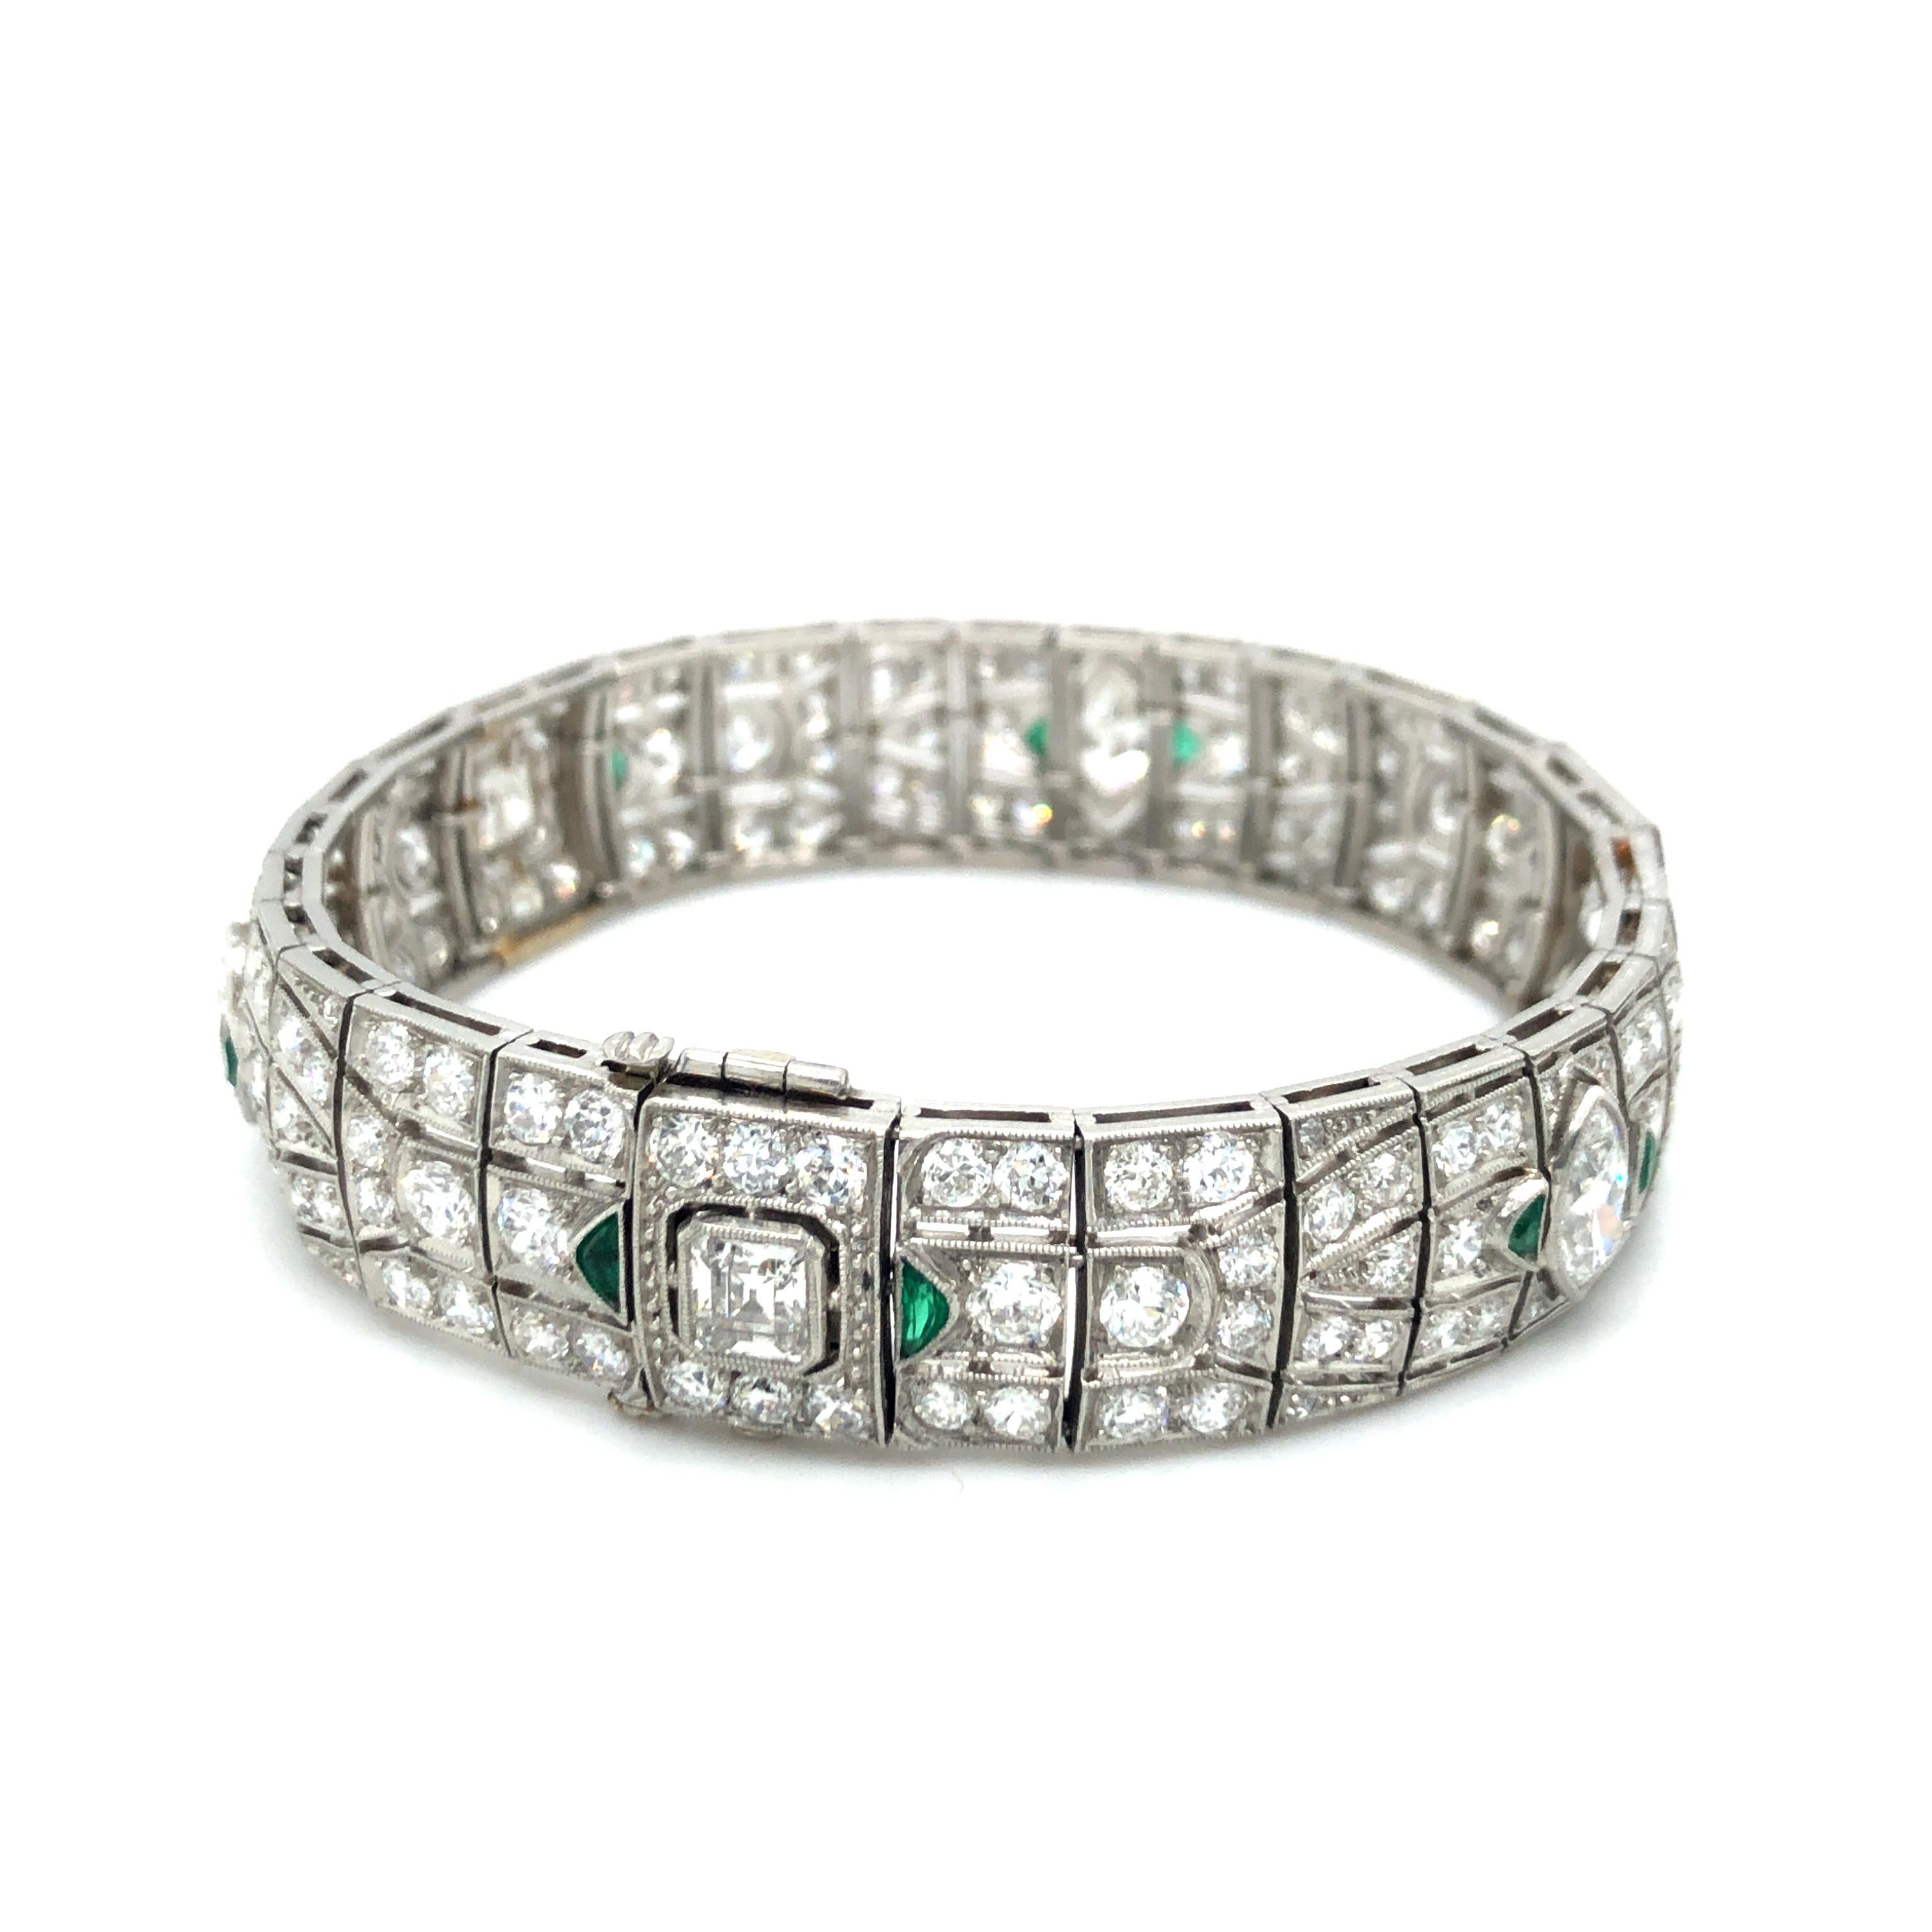 Marquise Cut Stunning Diamond and Emerald Art Deco Bracelet in Platinum 950 For Sale